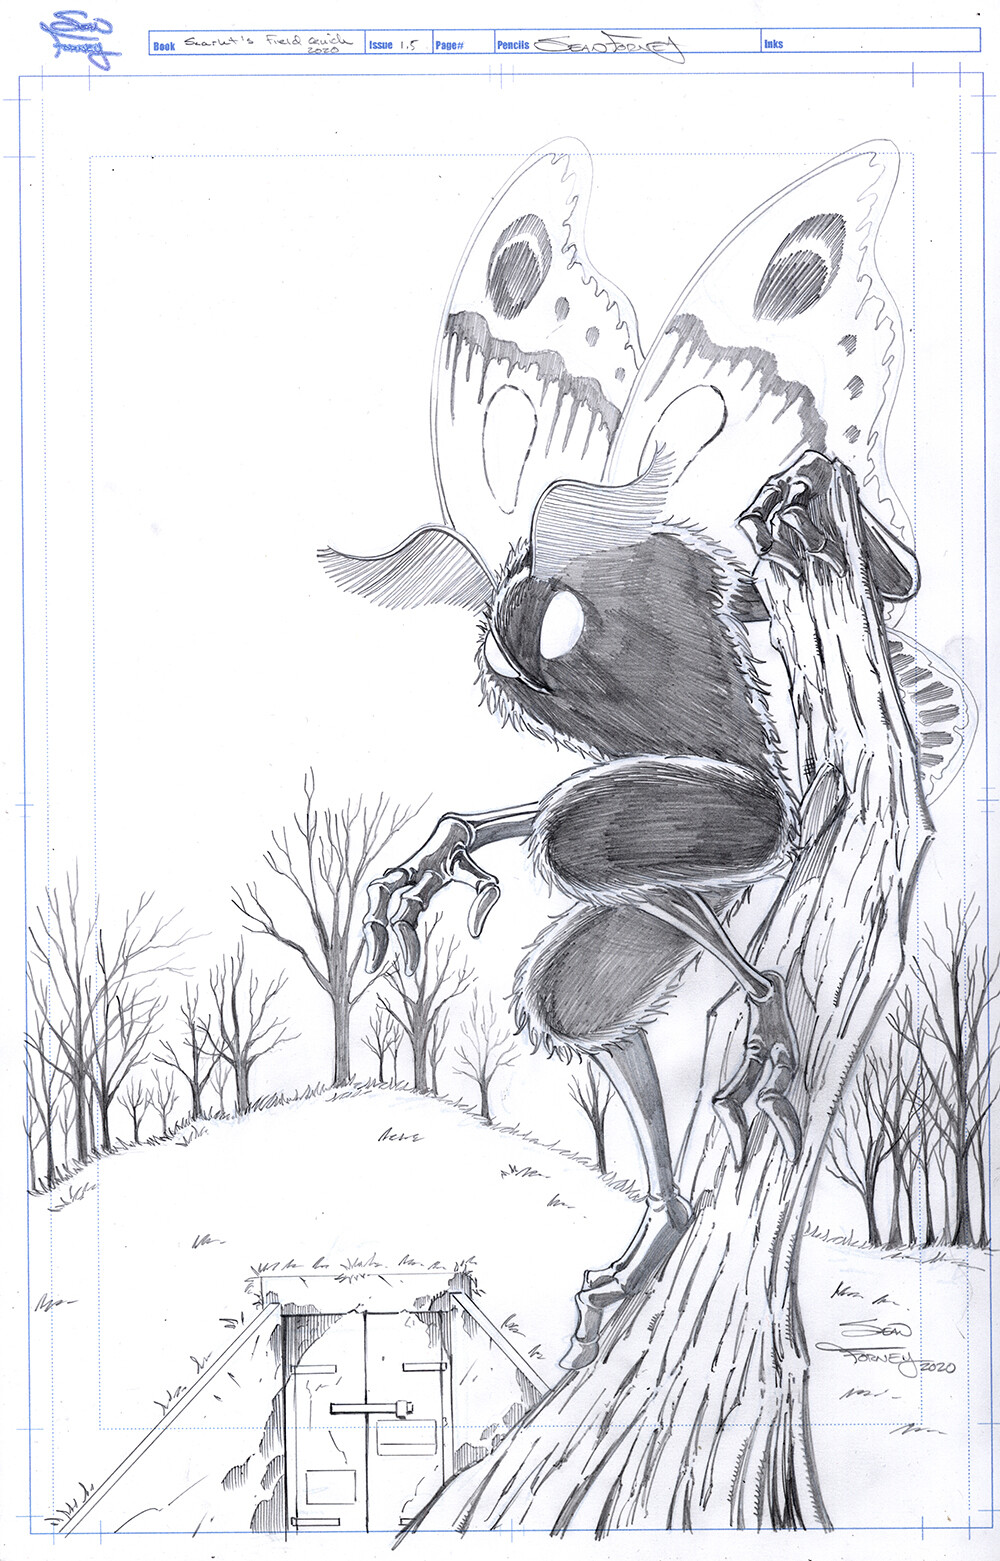 Mohtman artwork from Scarlets Field Guide to Cryptids and Other Creatures (2021) 

Pencils by Sean Forney

character and art copyright Sean Forney 2021